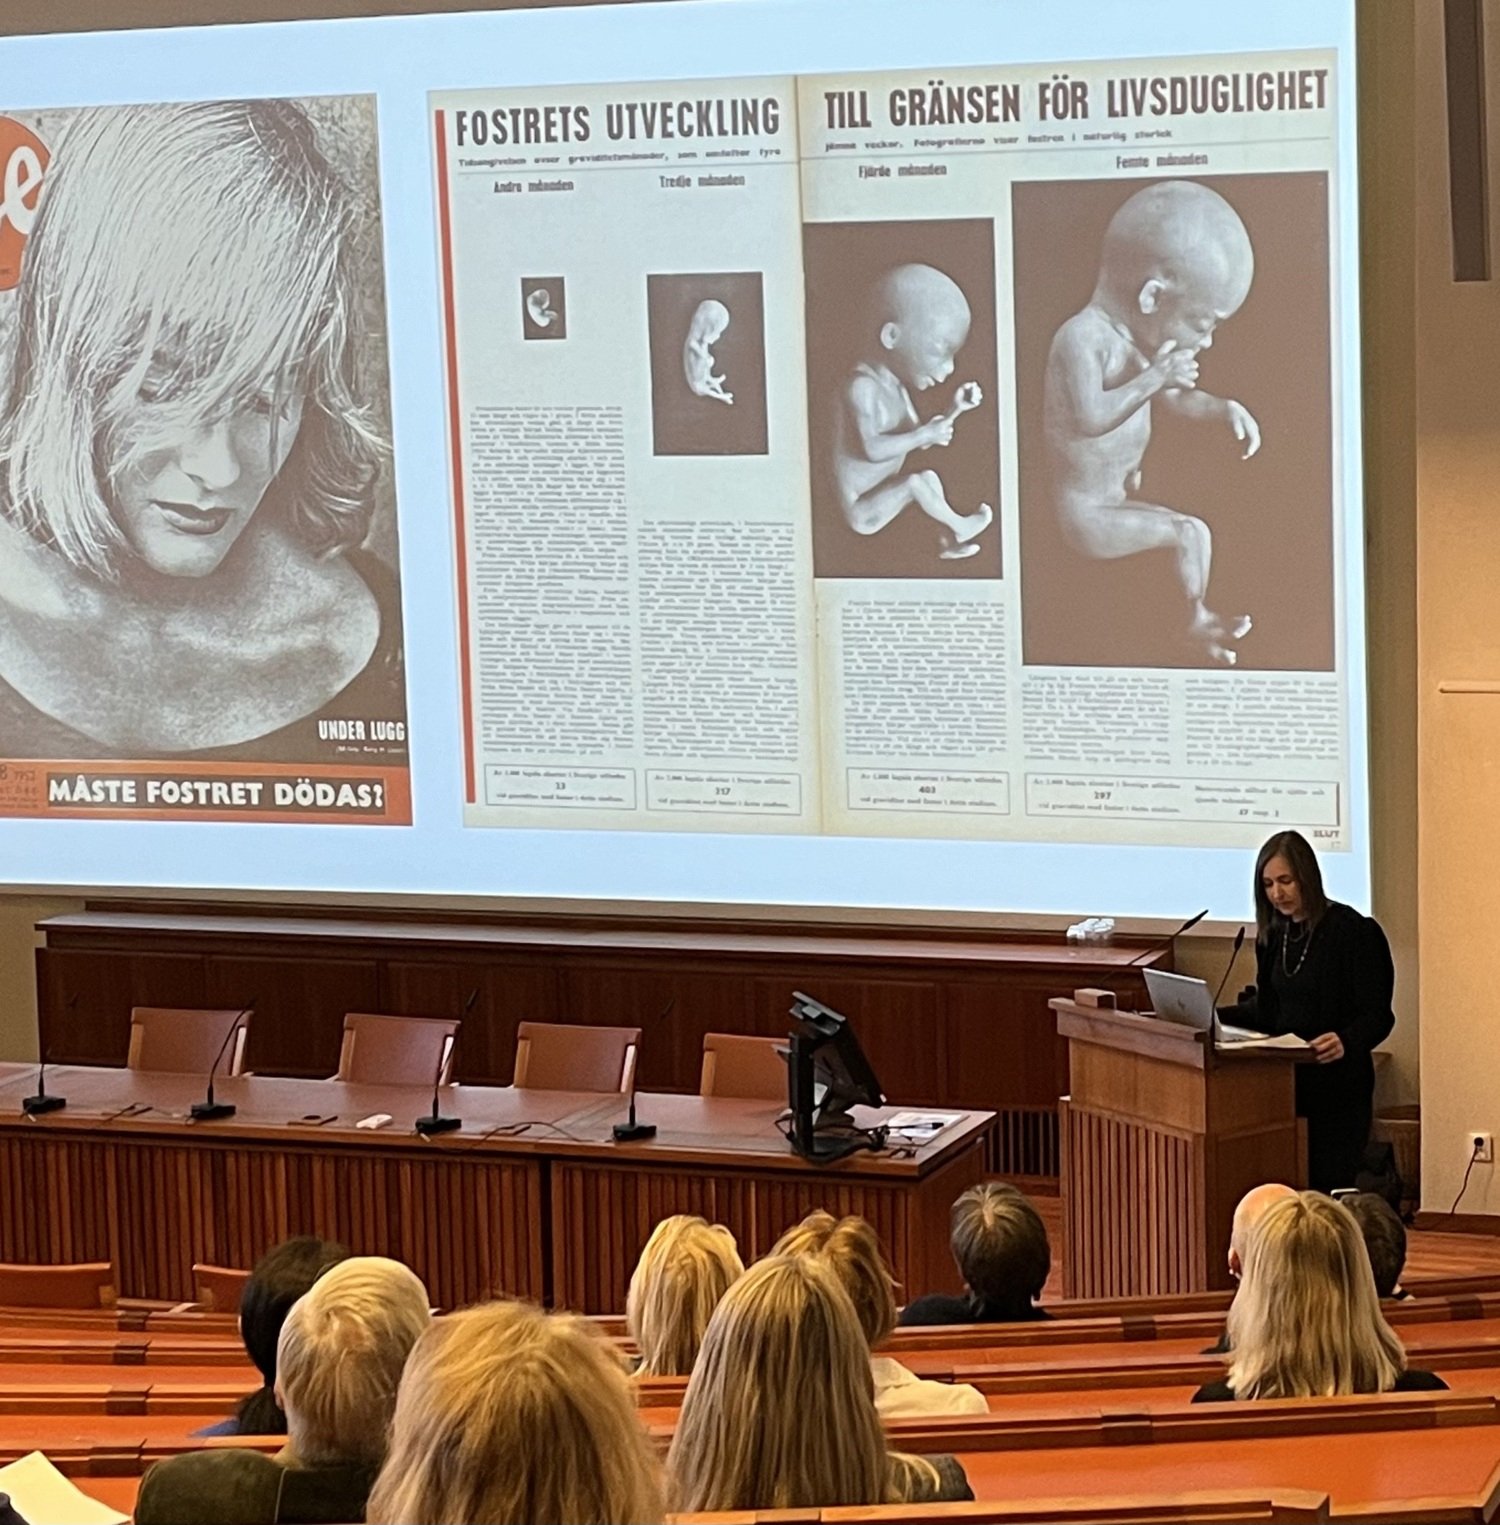 At the opening of the exhibition, Professor Solveig Jülich, Uppsala University, among others, spoke about the impact Lennart Nilsson's images had on his contemporaries.